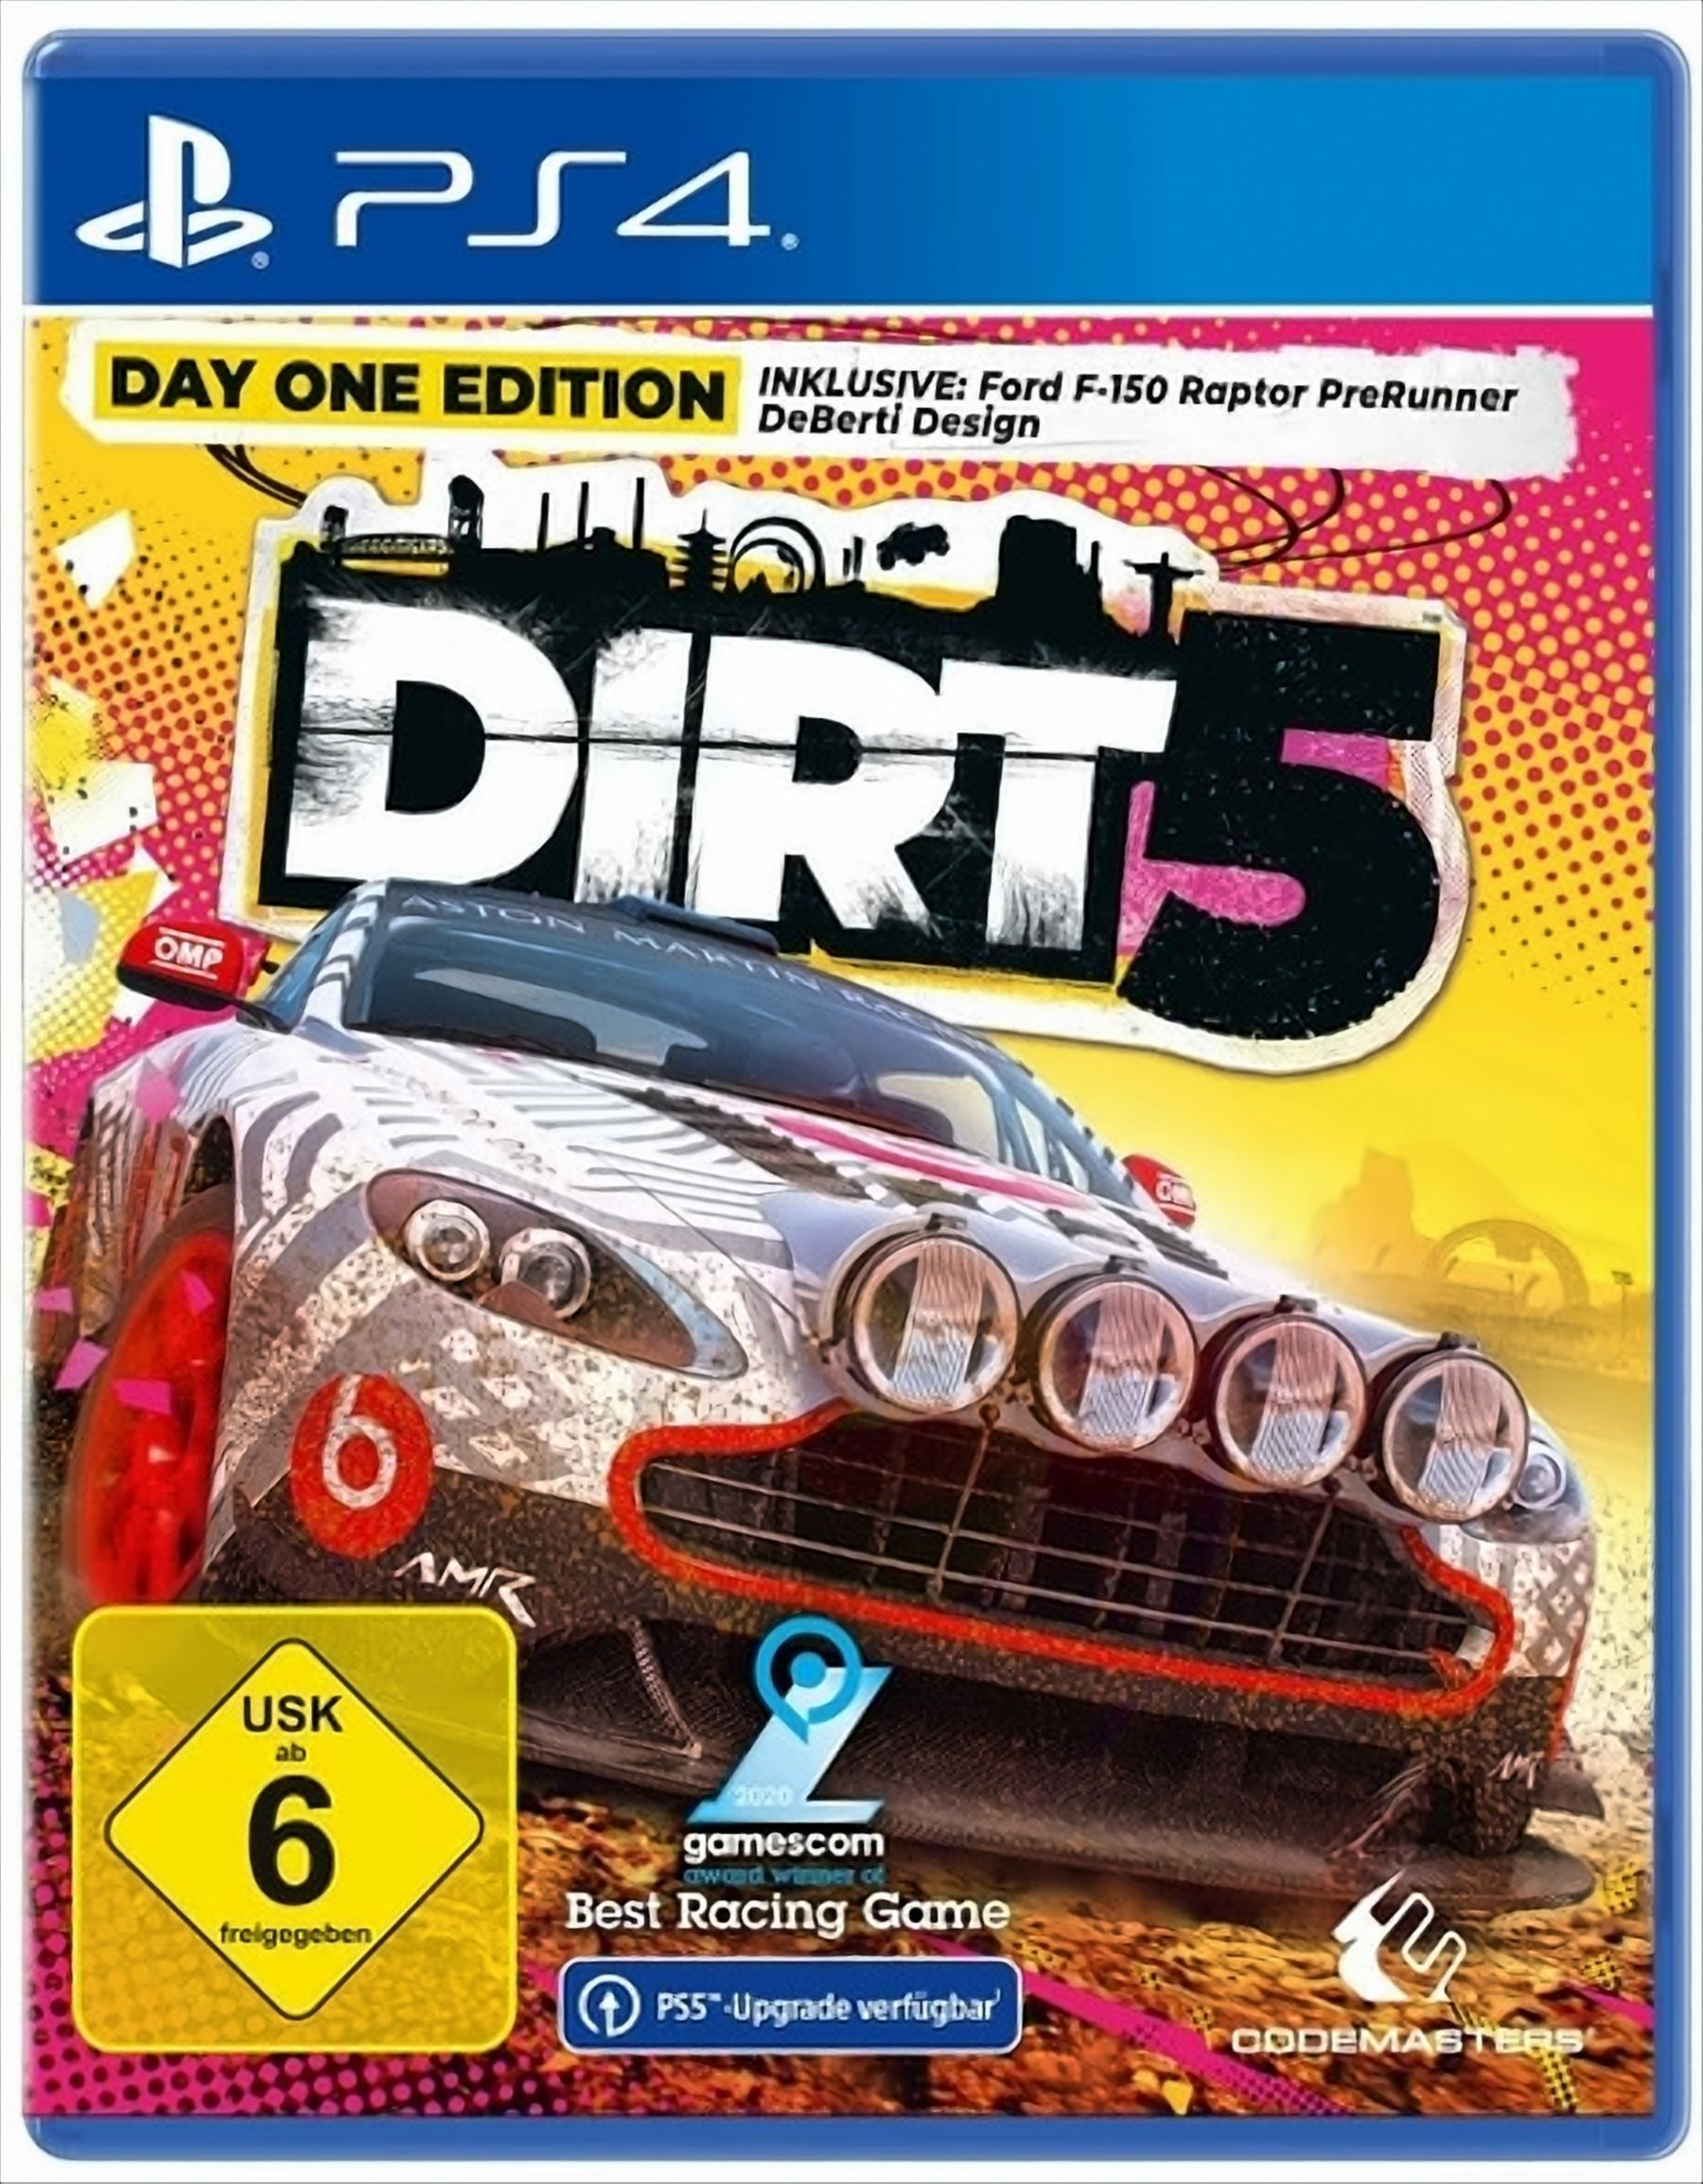 [PlayStation 5 One (USK) - DIRT Day (PS4) Edition - 4]